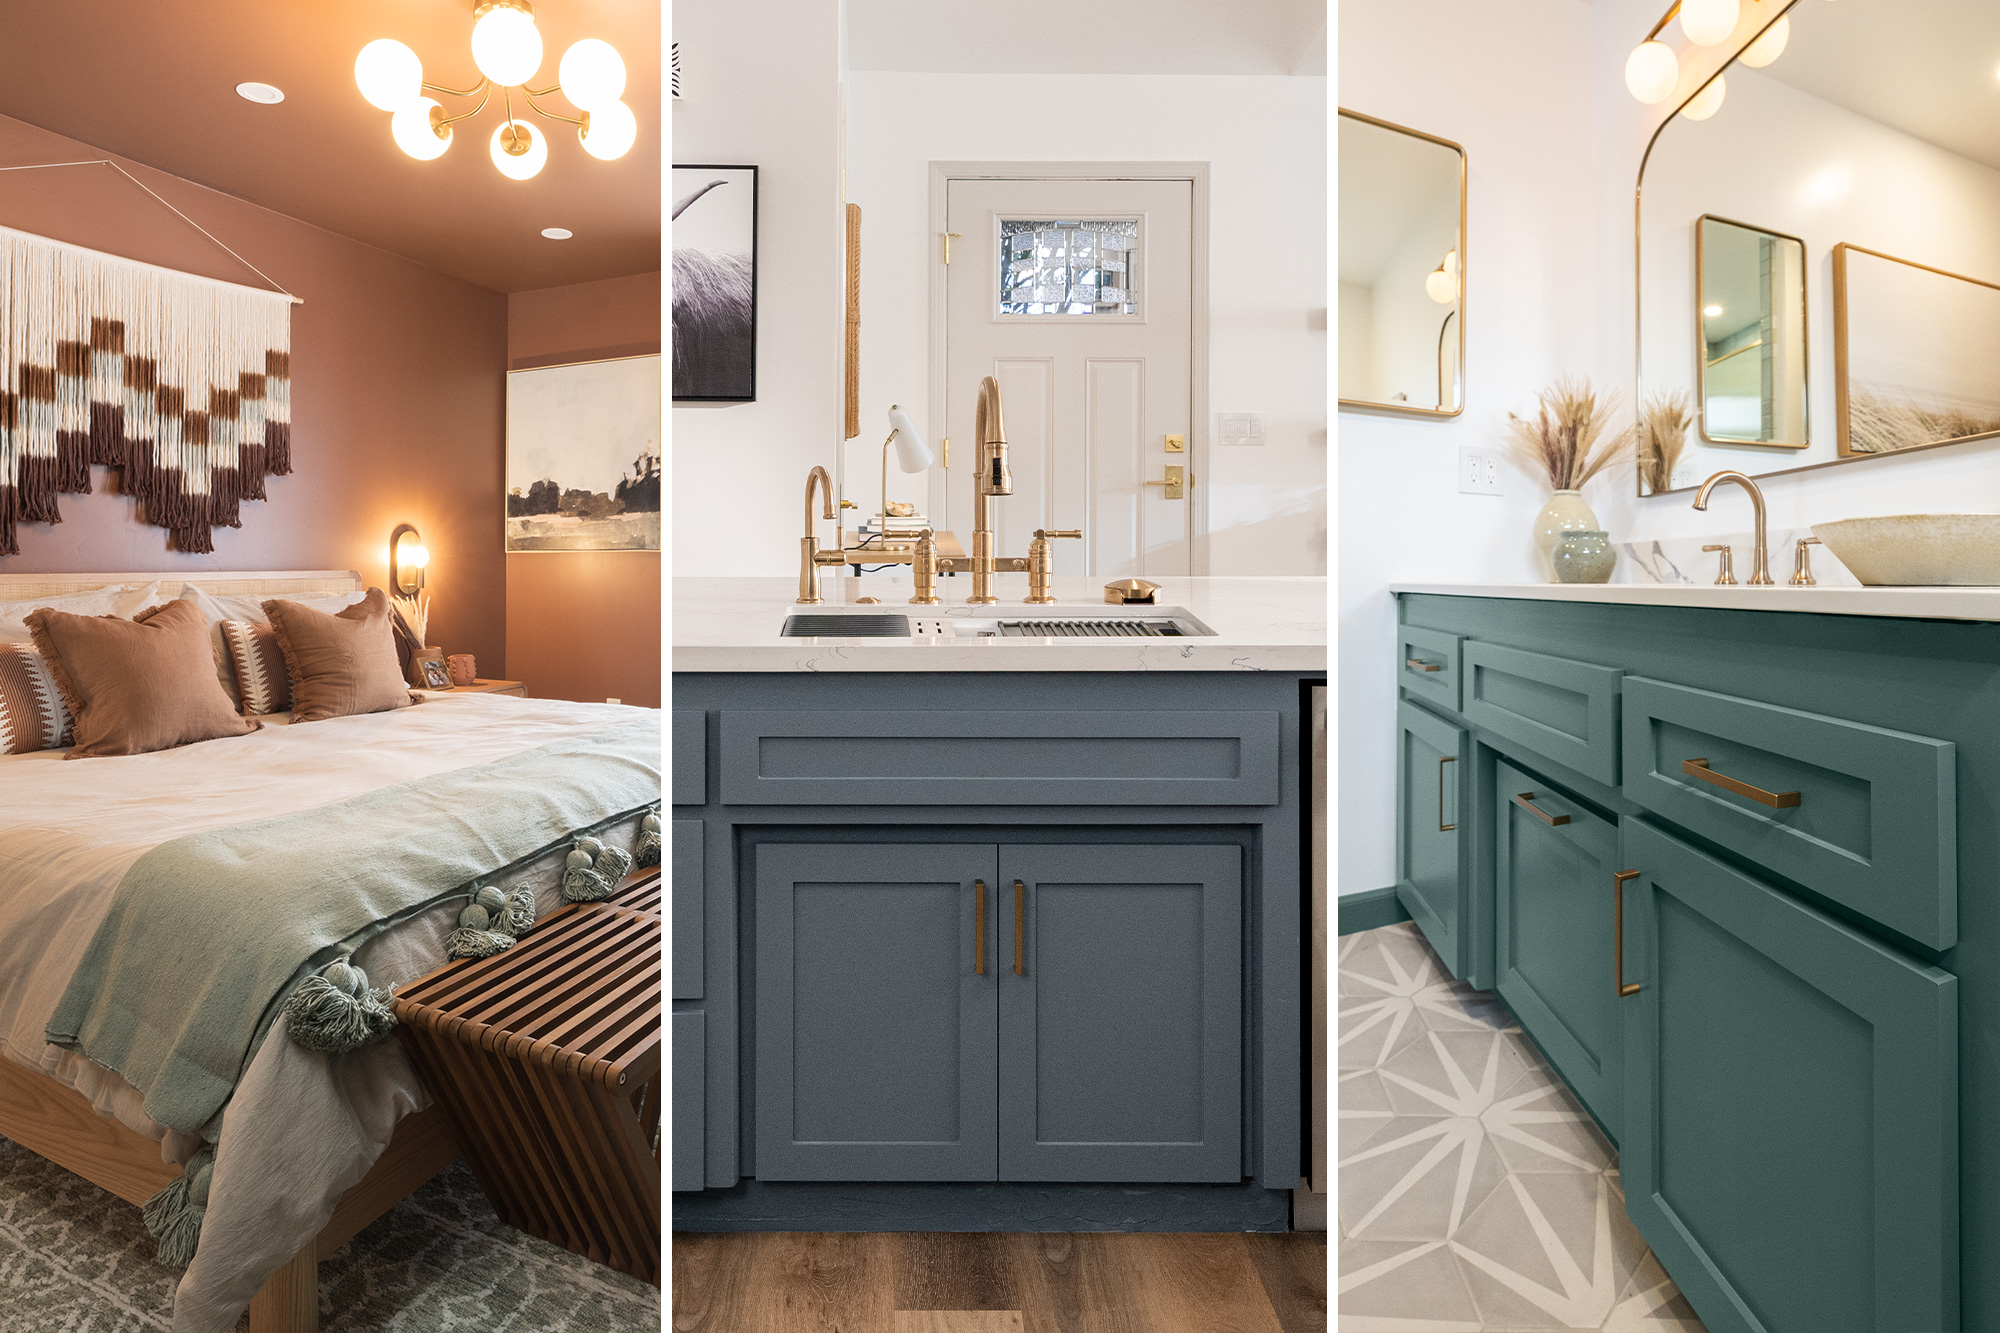 3 images of finished bedroom, kitchen, and bathroom projects from Destination Restoration.